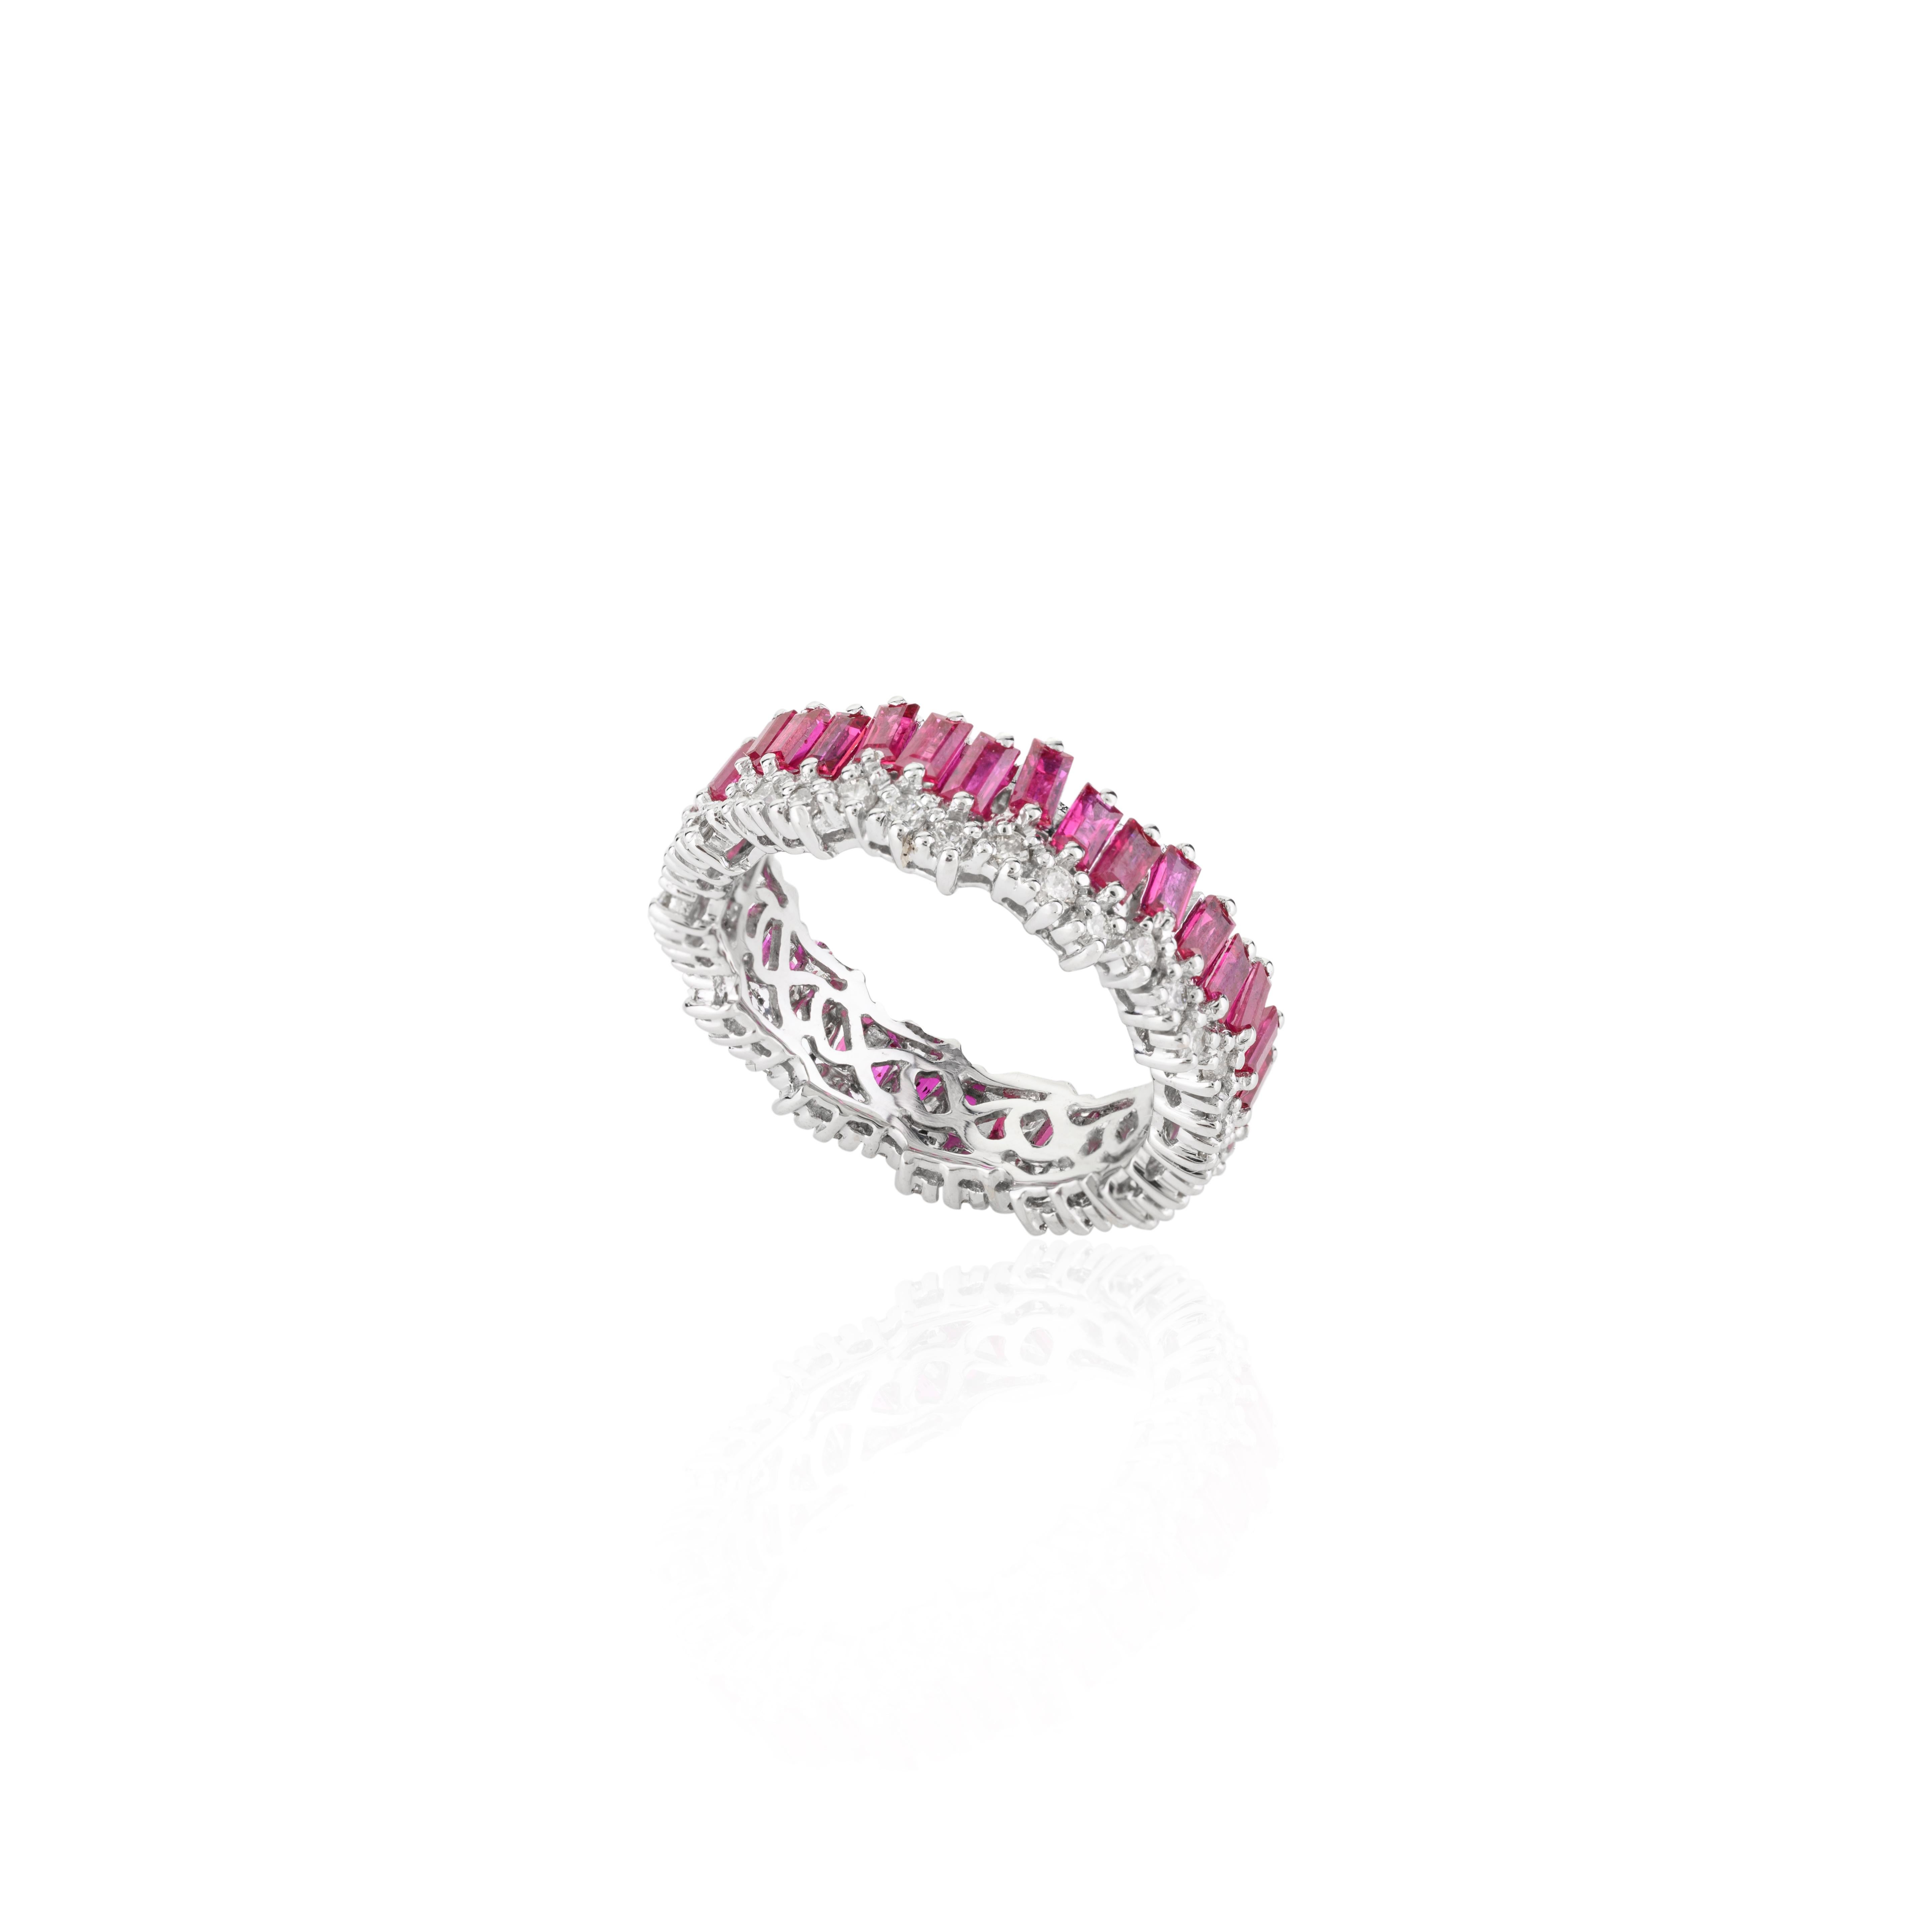 For Sale:  2.2 Carat Ruby and Diamond Engagement Band Ring in 18k White Gold 4